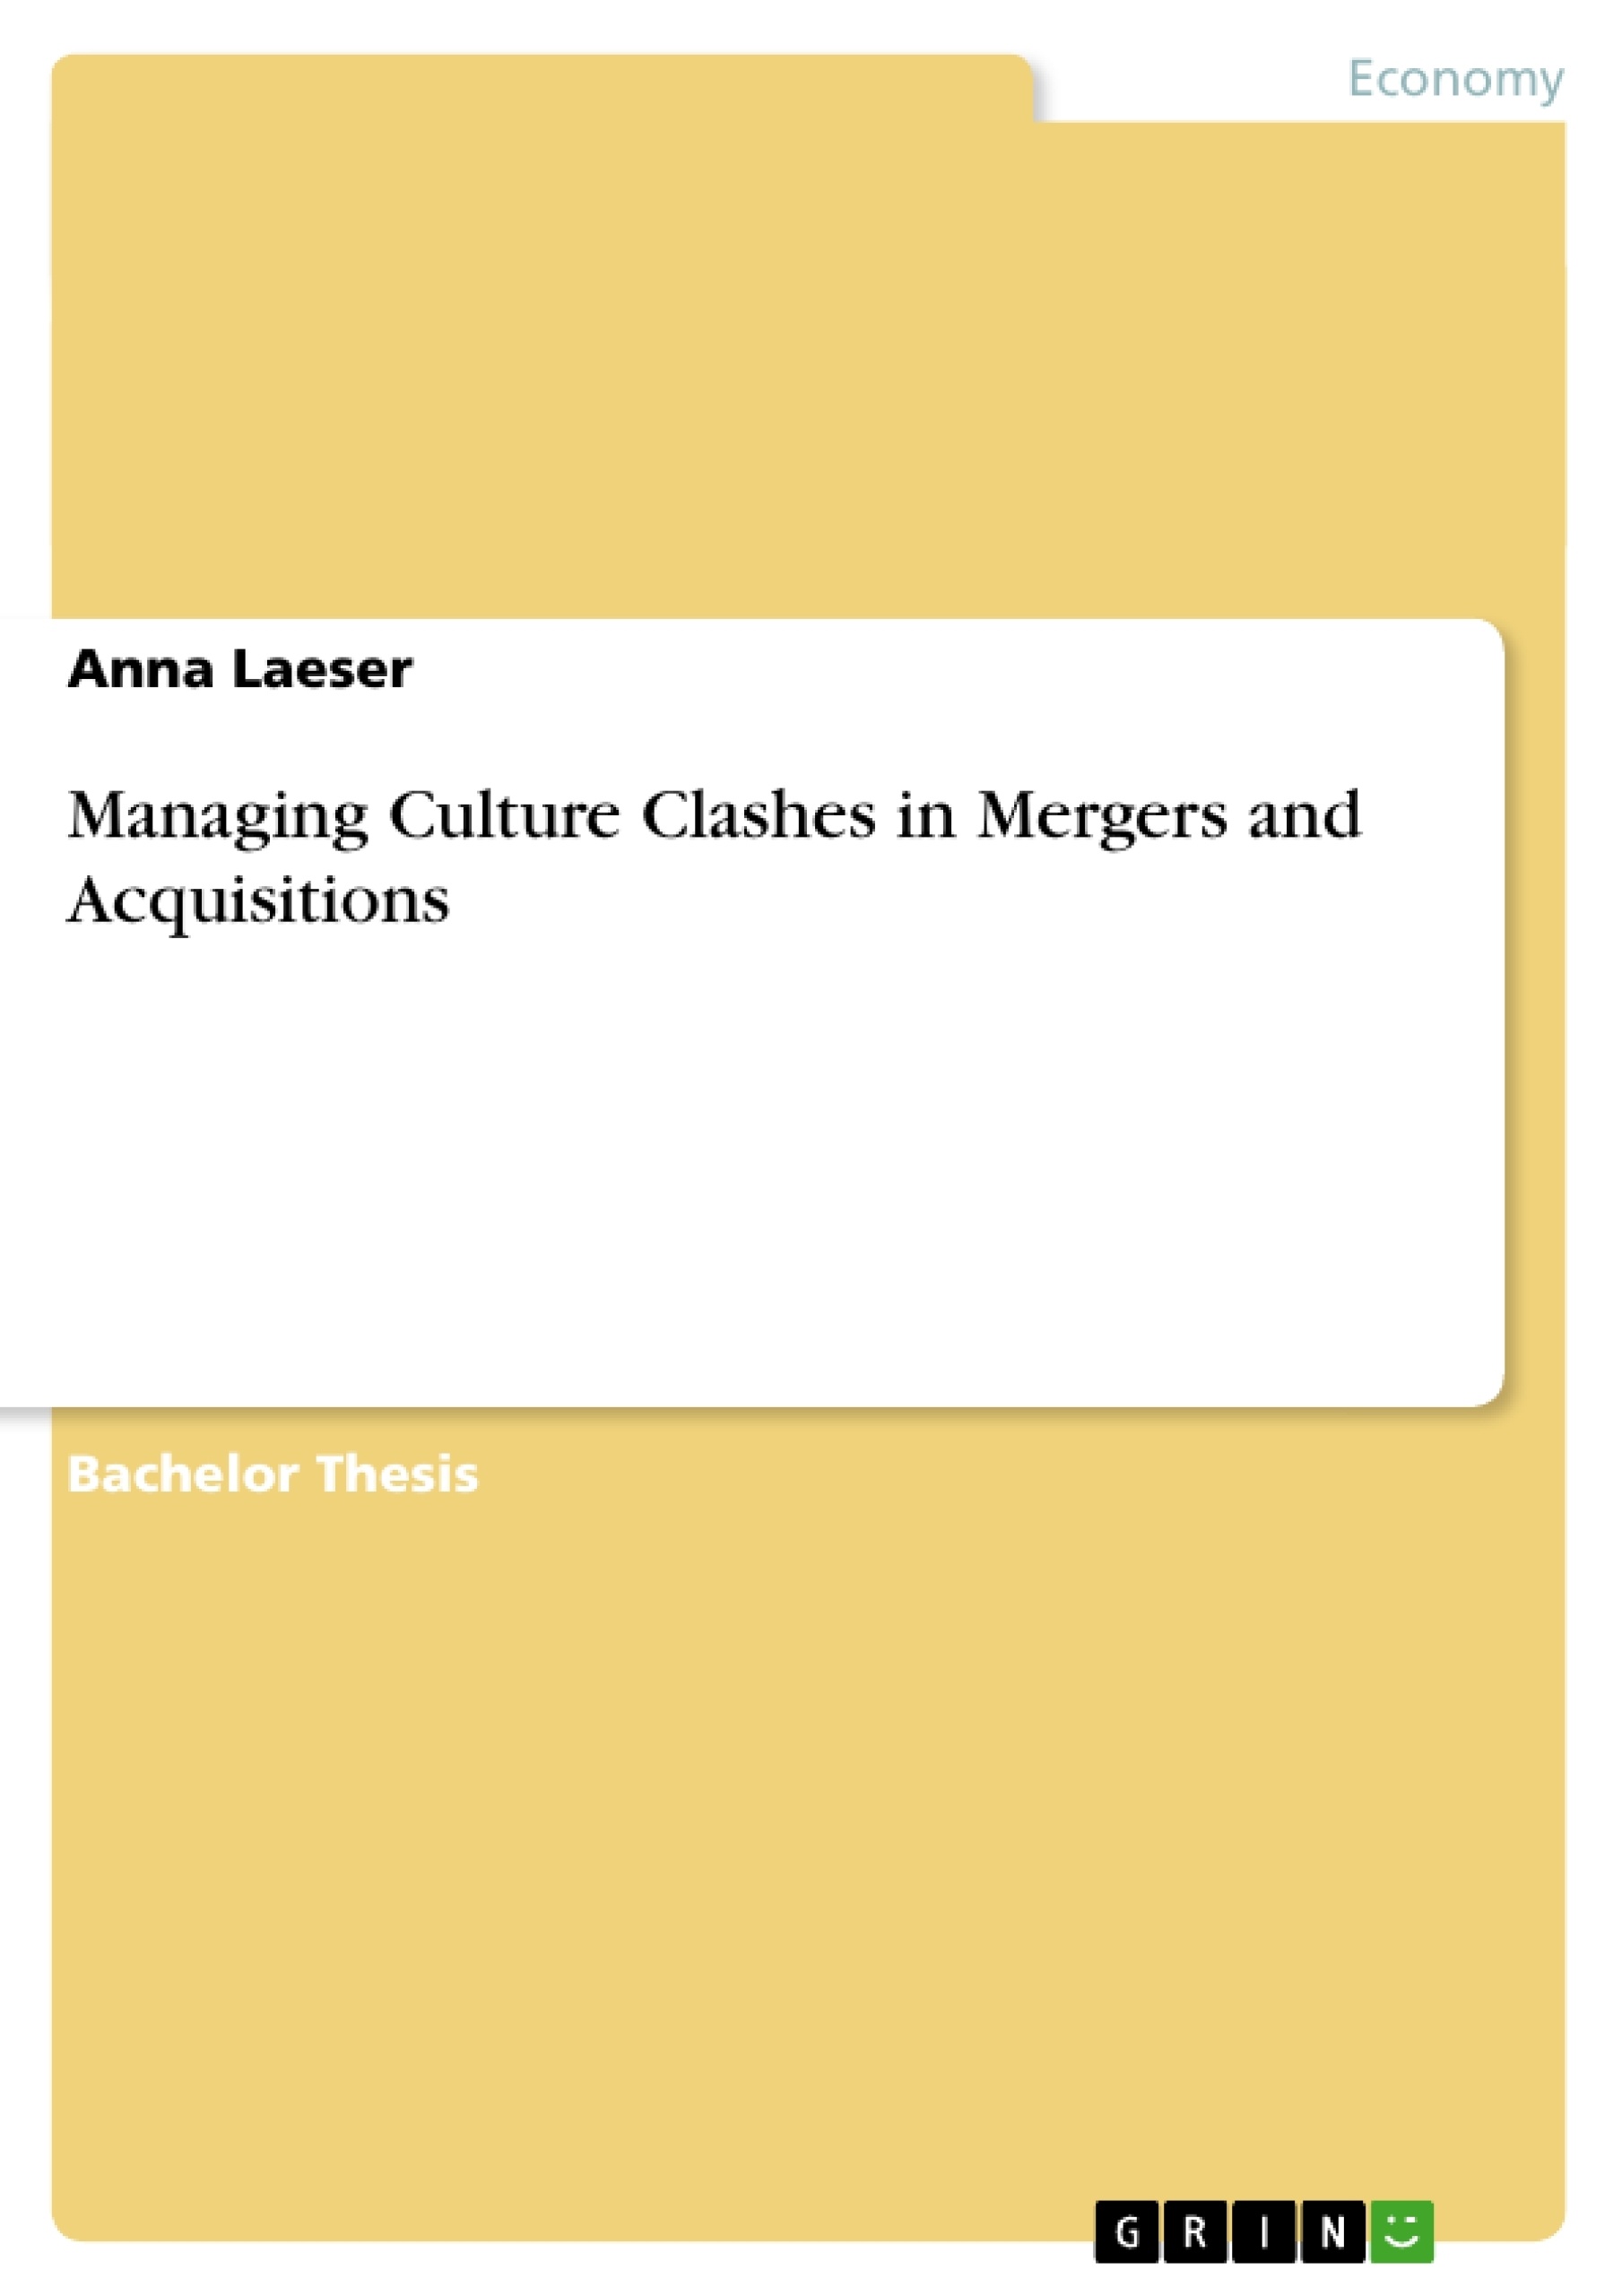 Title: Managing Culture Clashes in Mergers and Acquisitions